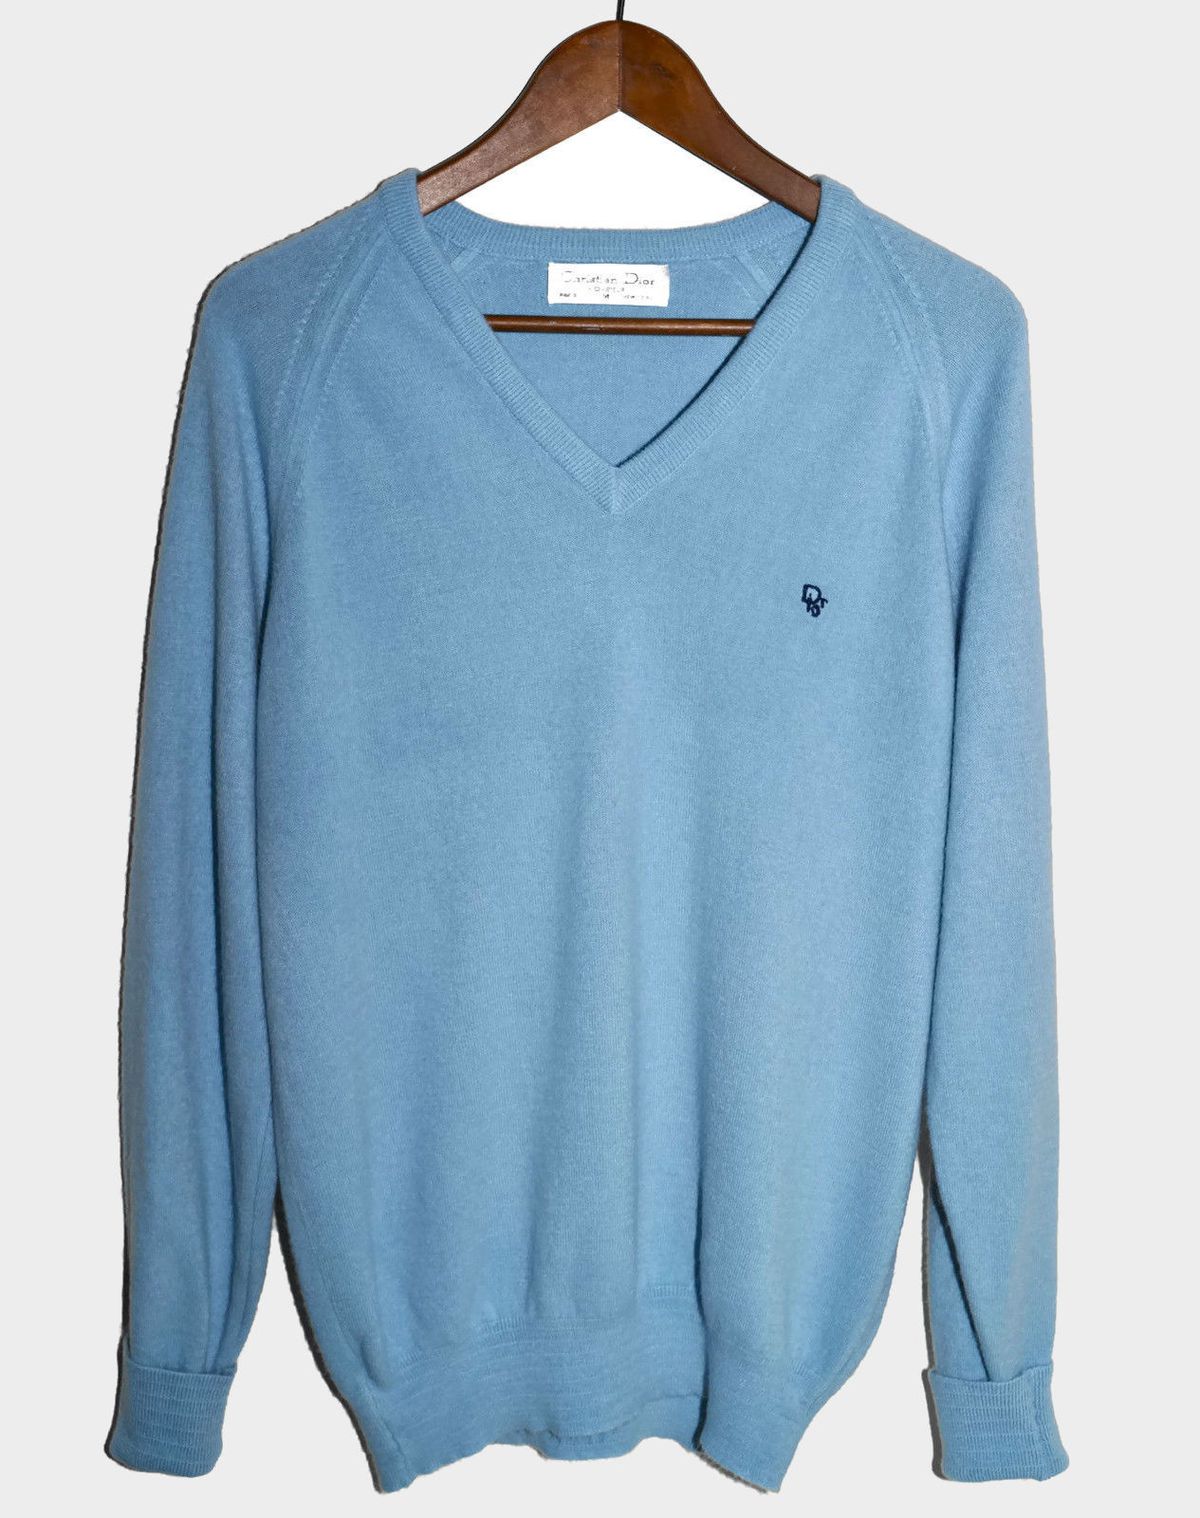 A baby blue Christian Dior men’s sweater on a hanger